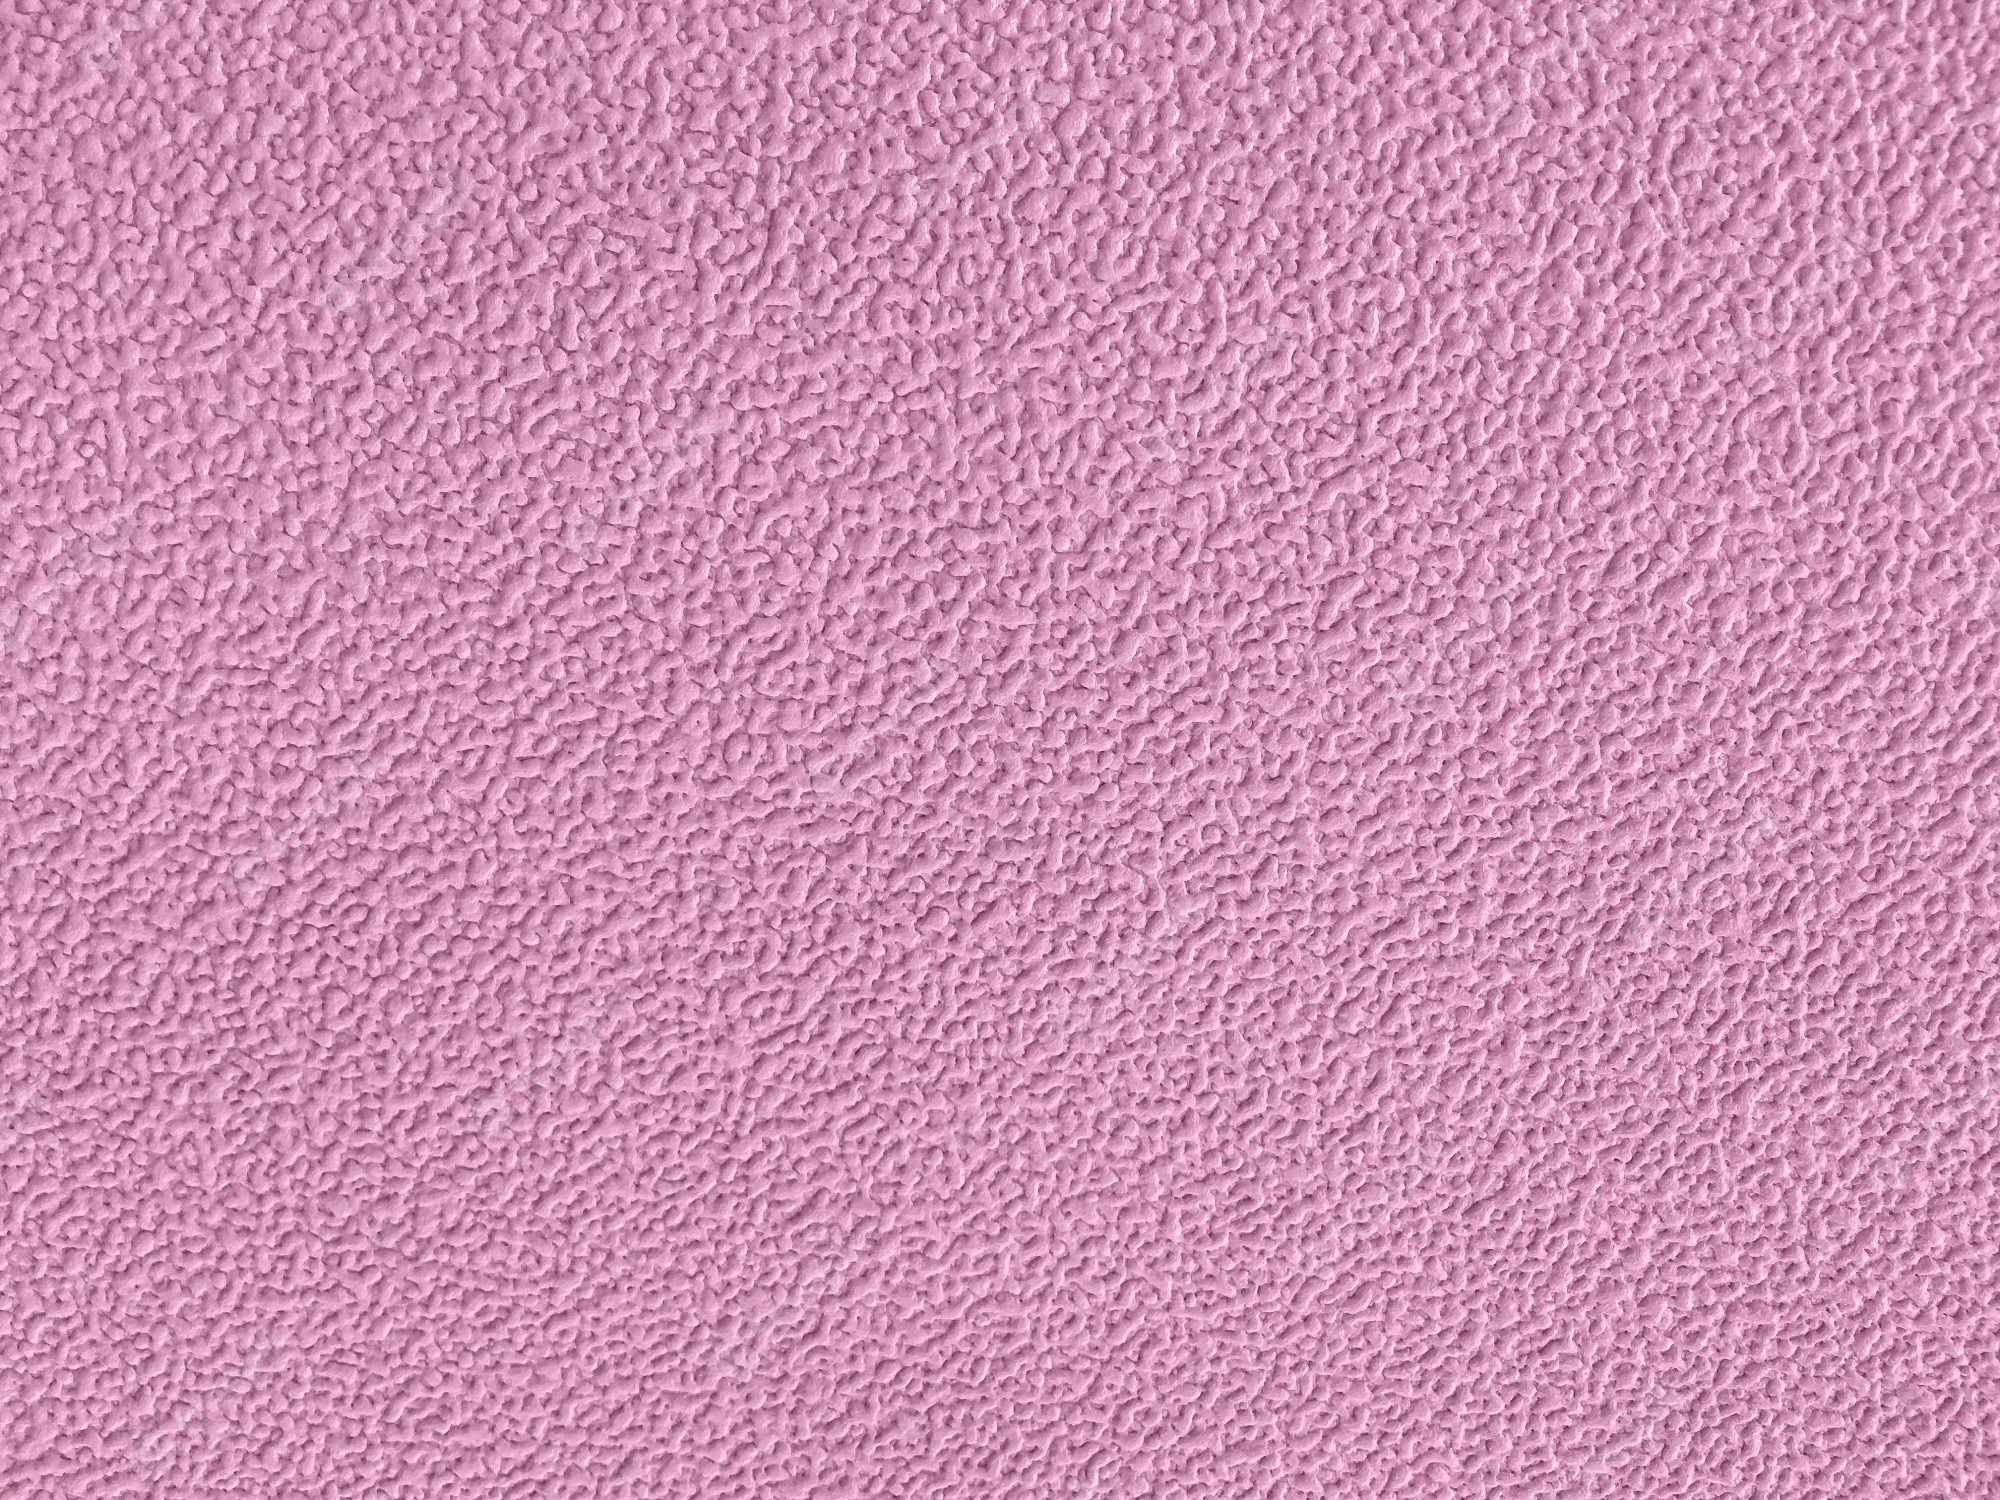 A close up of a pink leather texture - Light pink